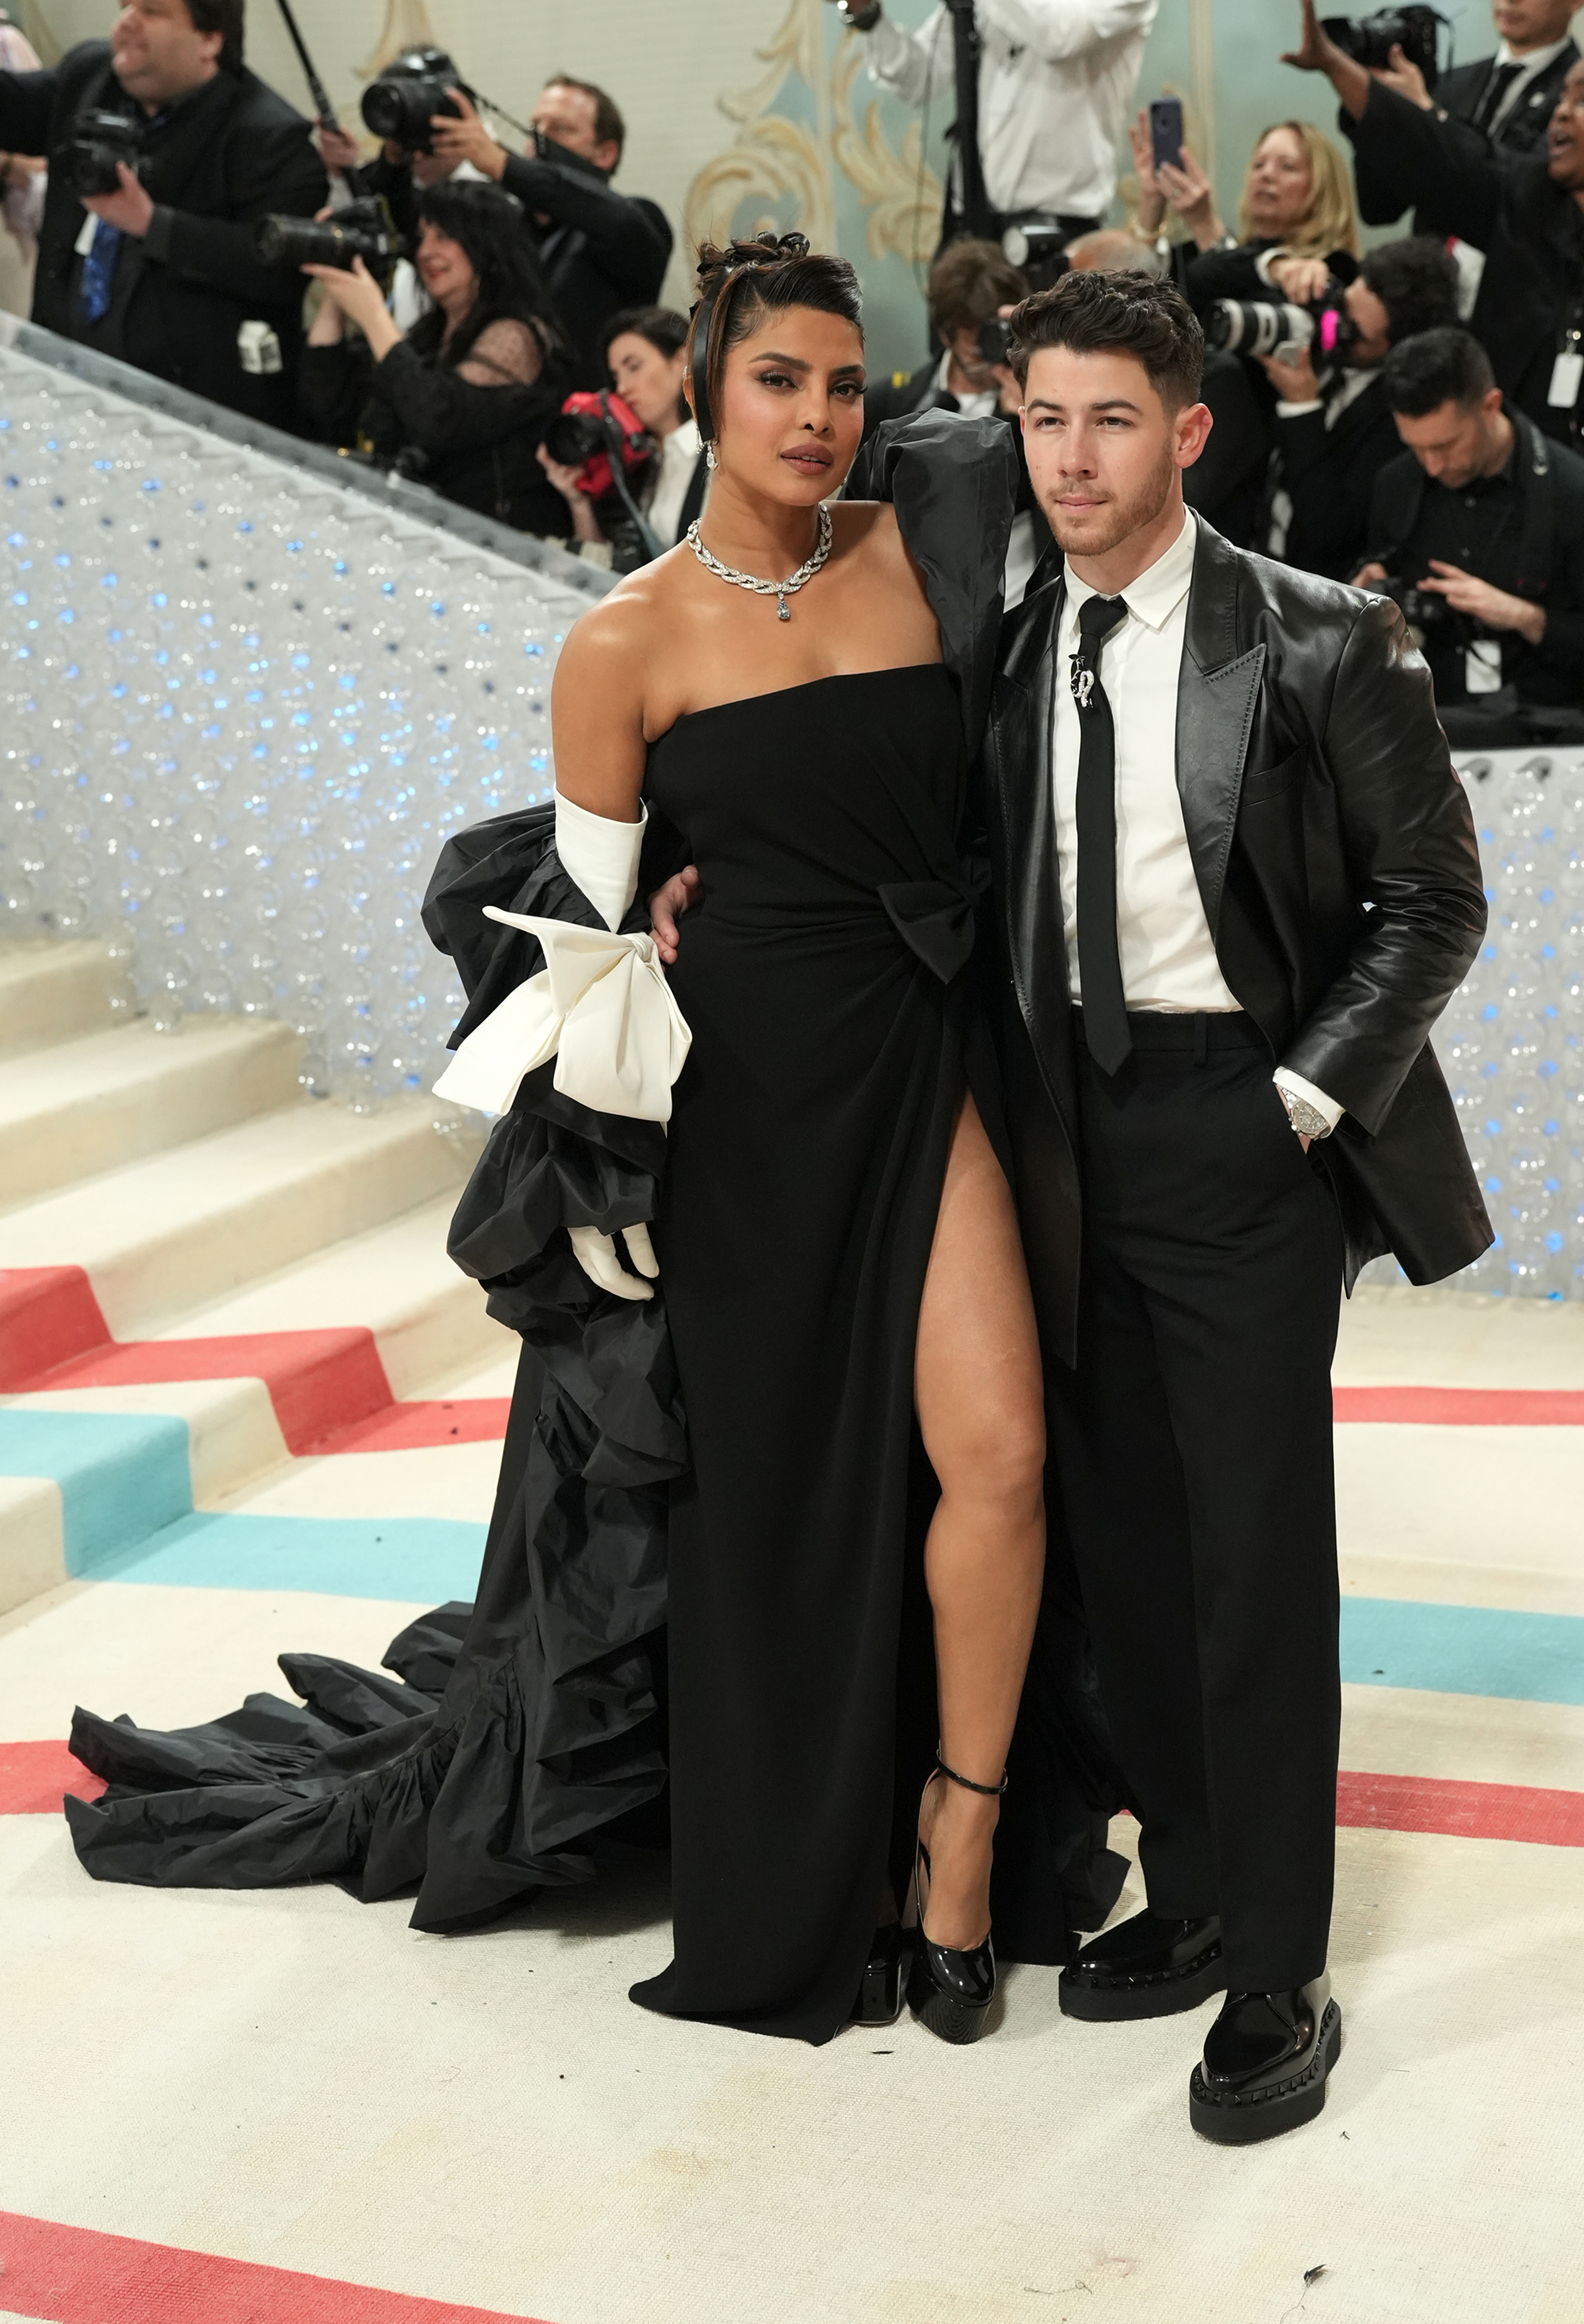 Priyanka Chopra in a black gown with a high slit and Nick Jonas in a black suit on the Met Gala stairs